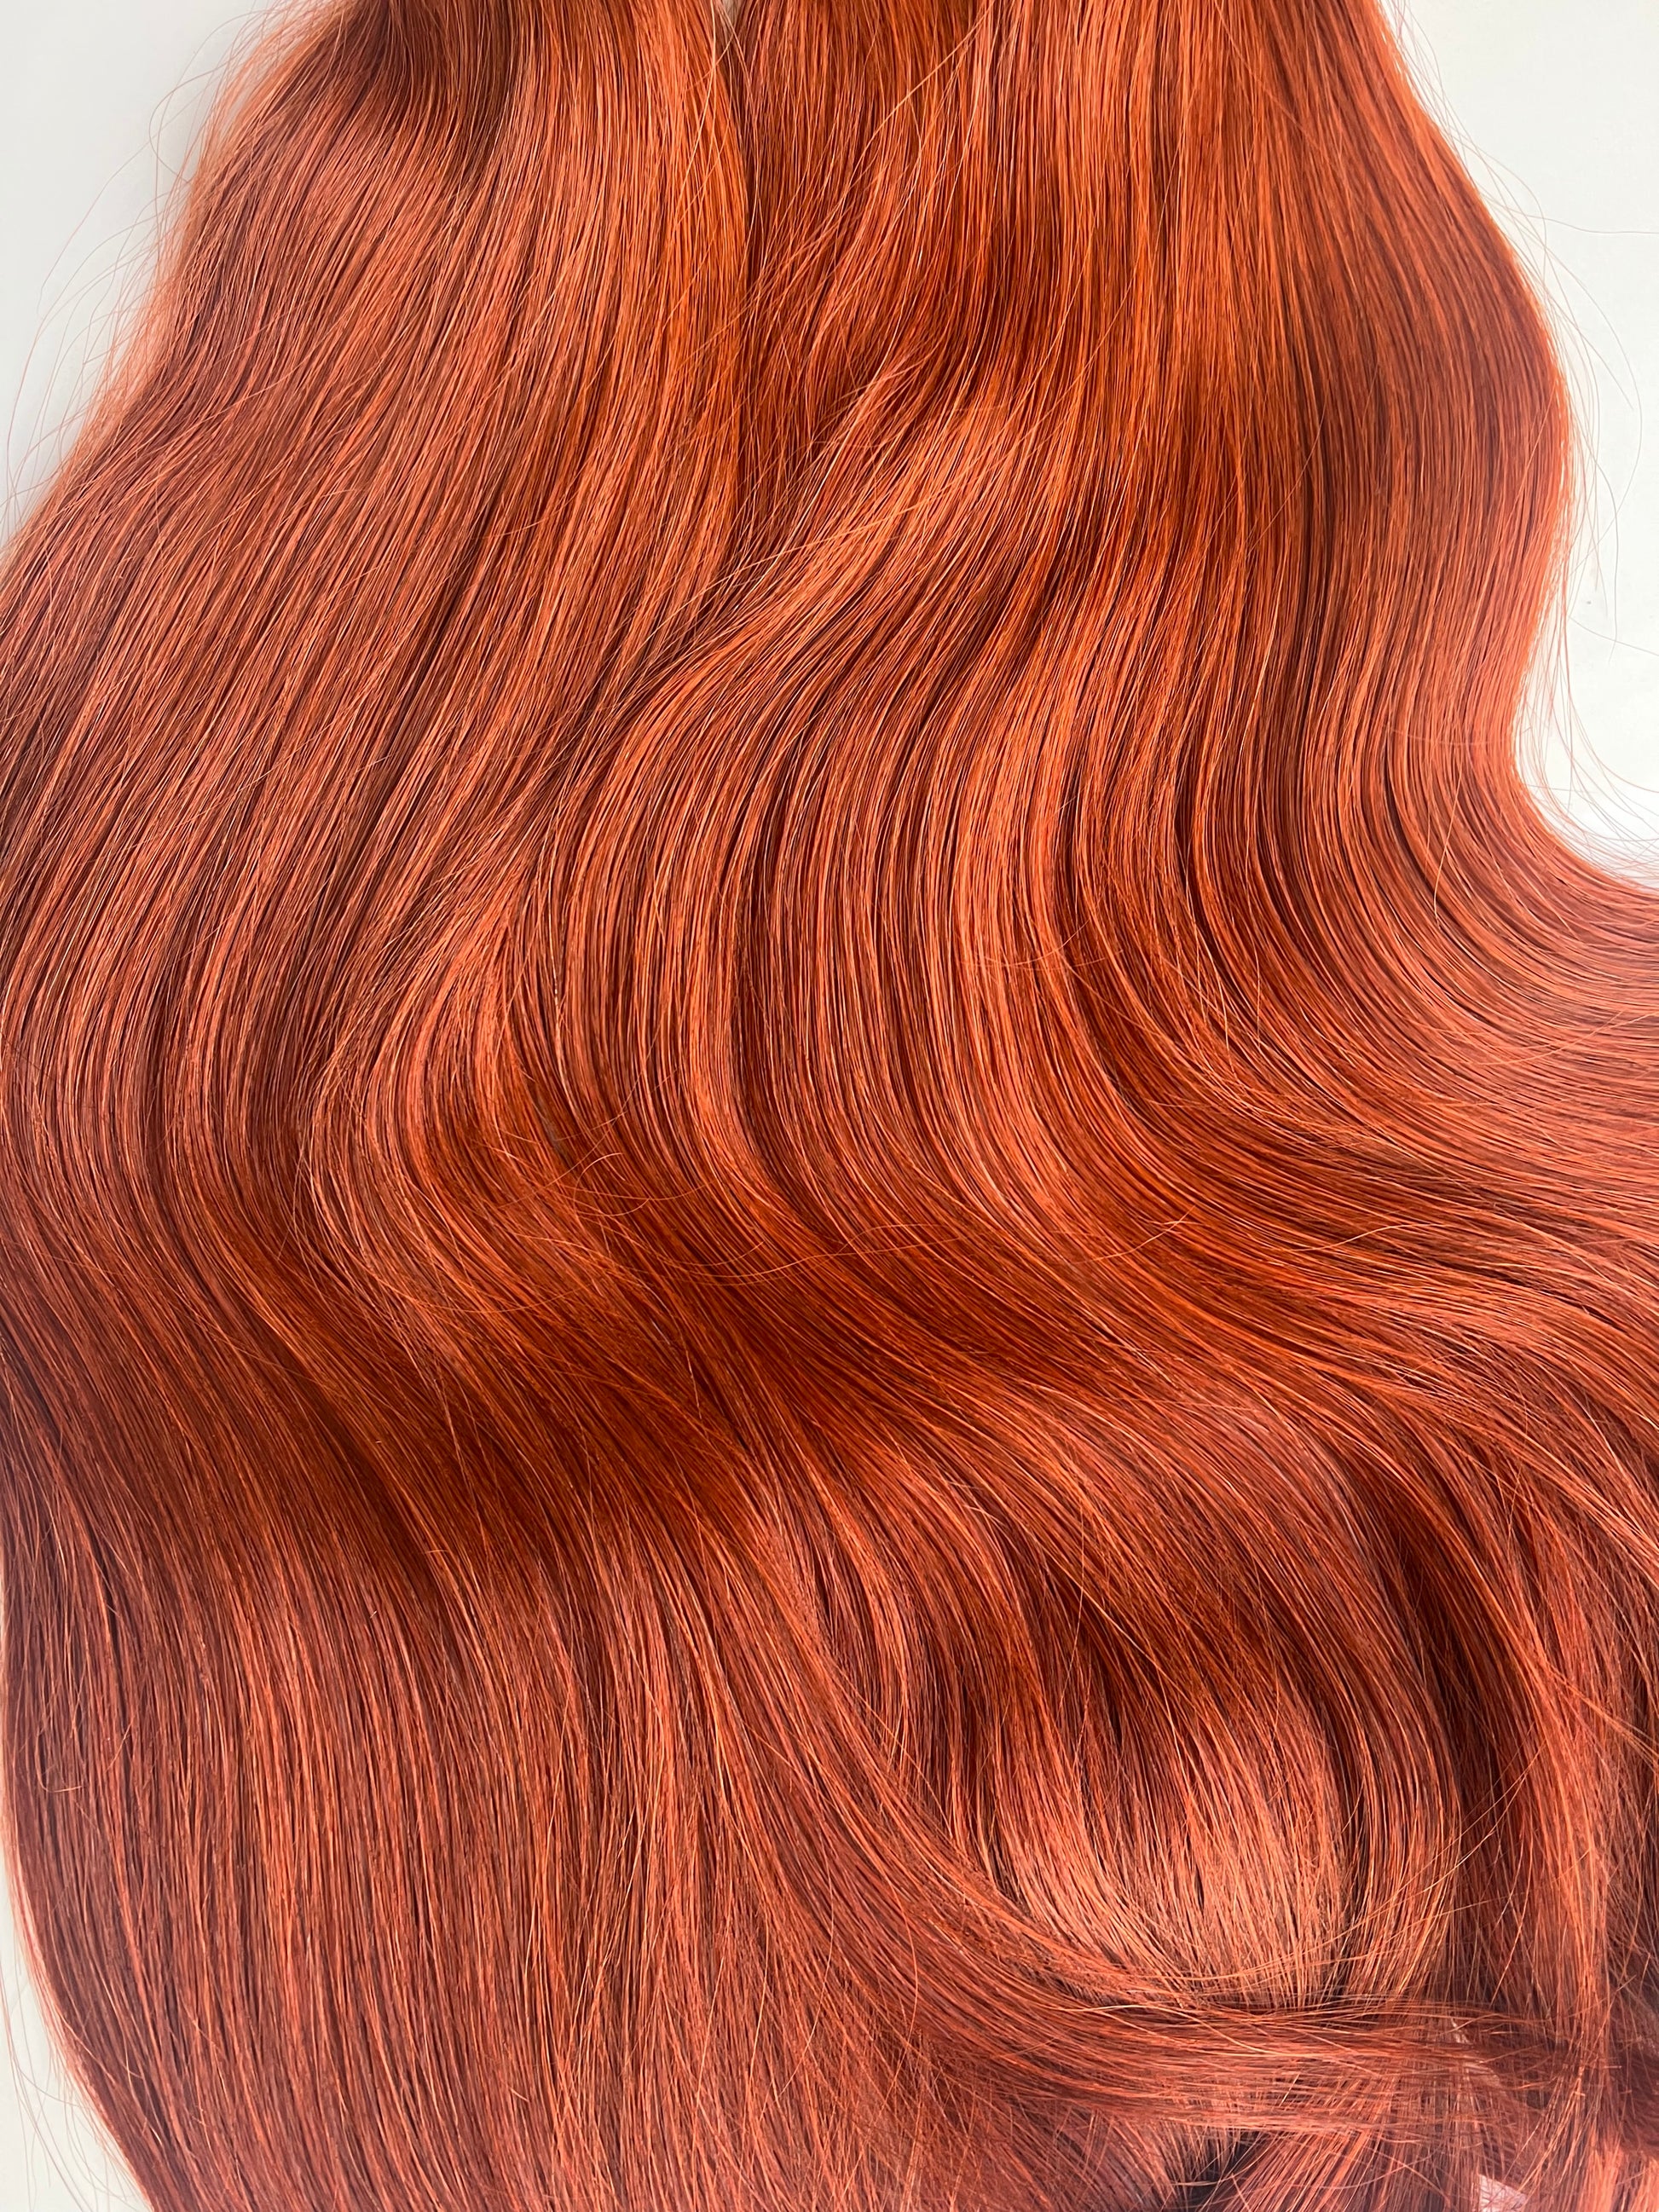 20” Tape in Hair Extensions - Shade Burnt Orange 530 - Ladylux